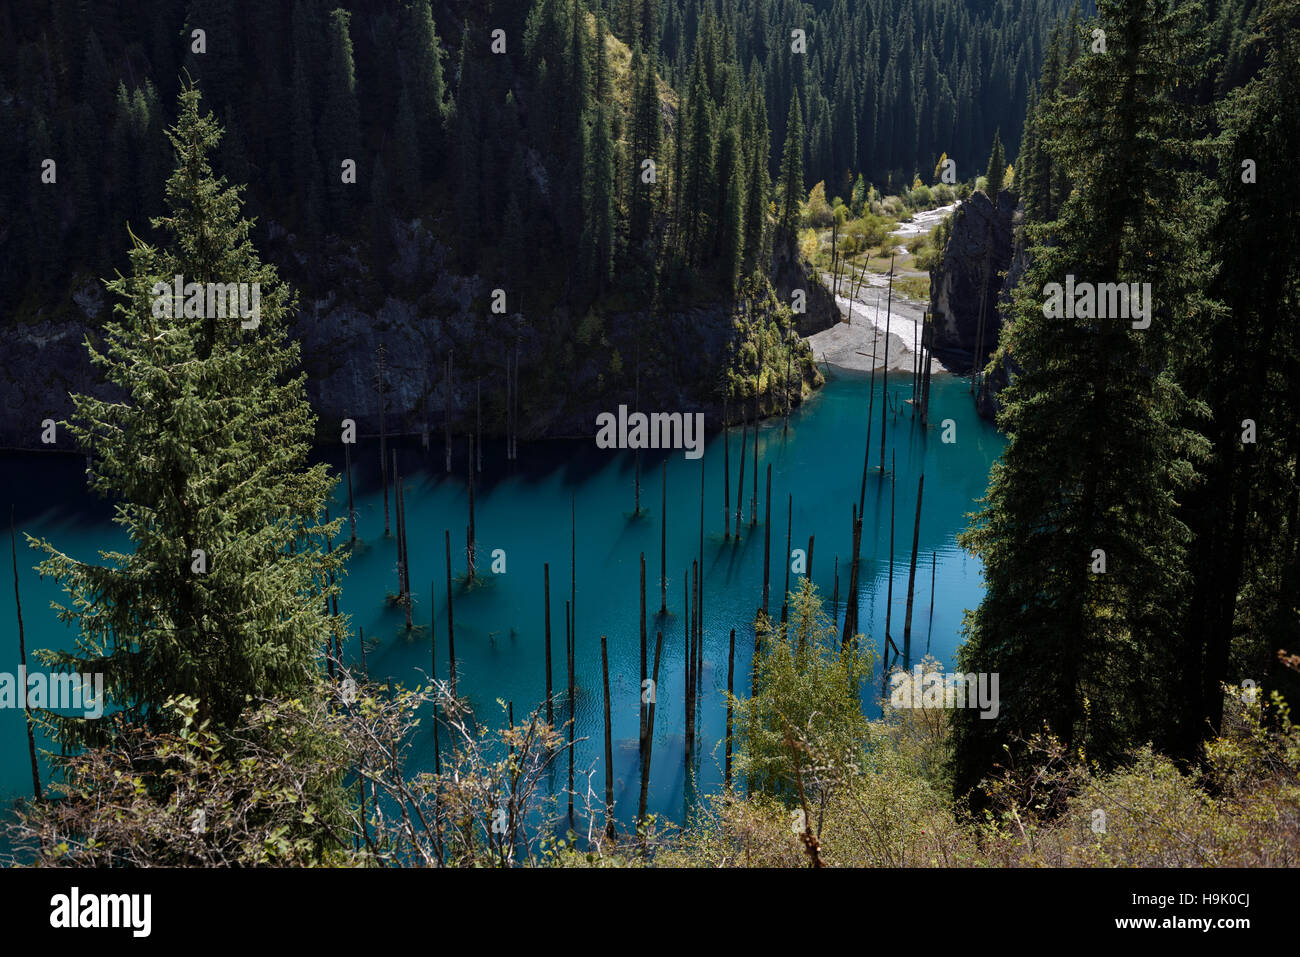 Kaindy river entering turquoise Lake Kaindy with dead Spruce trees in the Alatau mountains of Kazakhstan Stock Photo